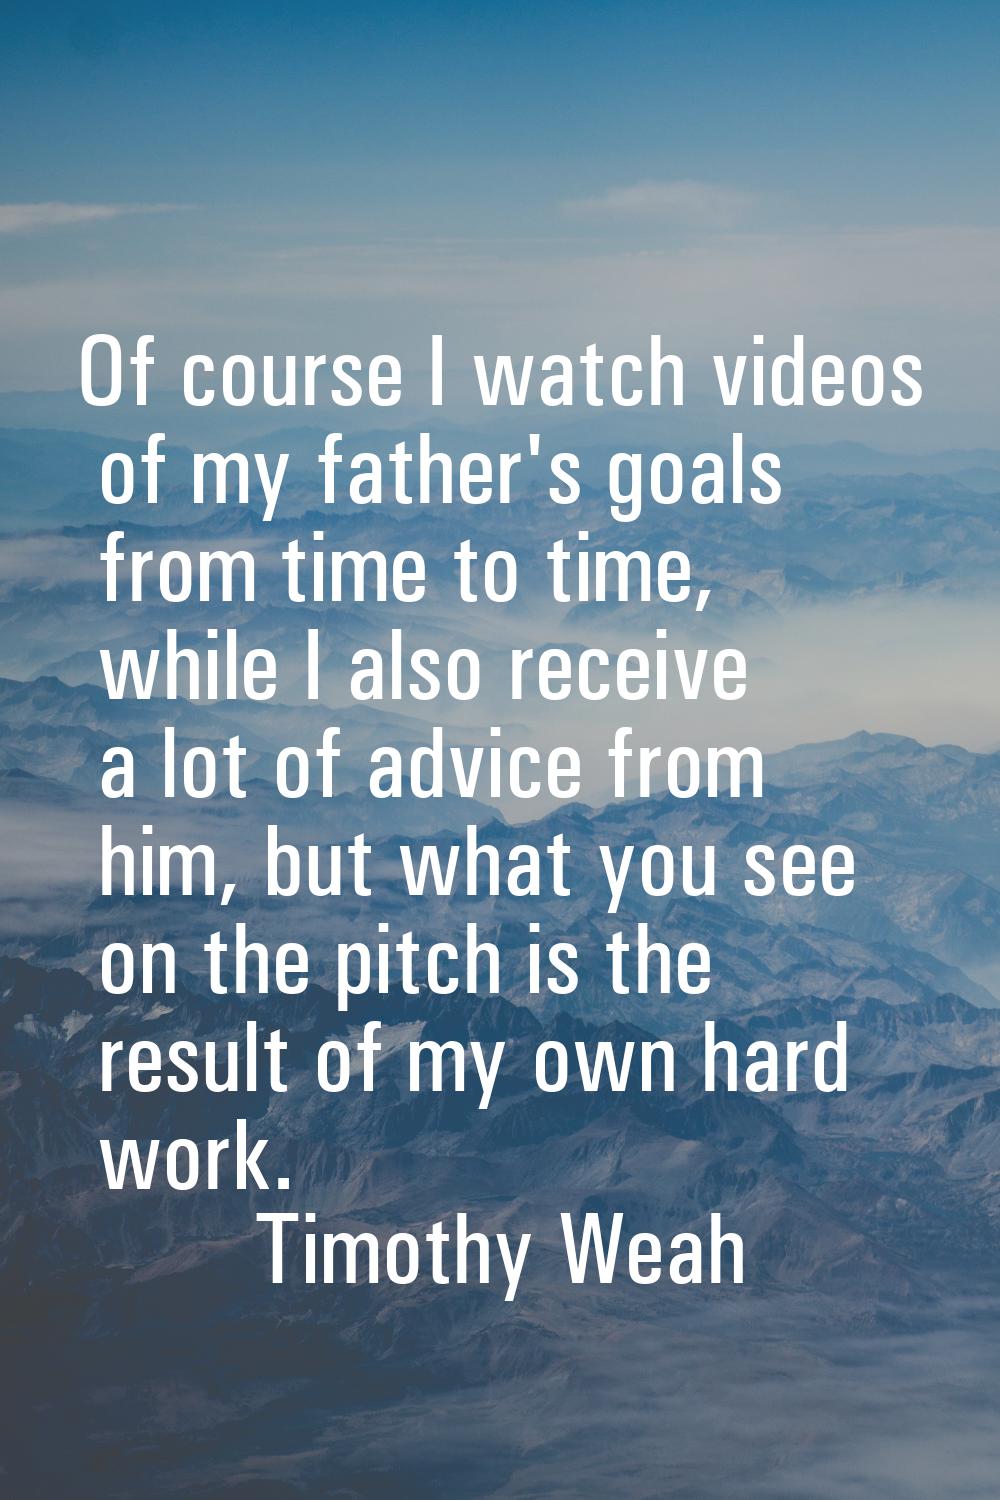 Of course I watch videos of my father's goals from time to time, while I also receive a lot of advi